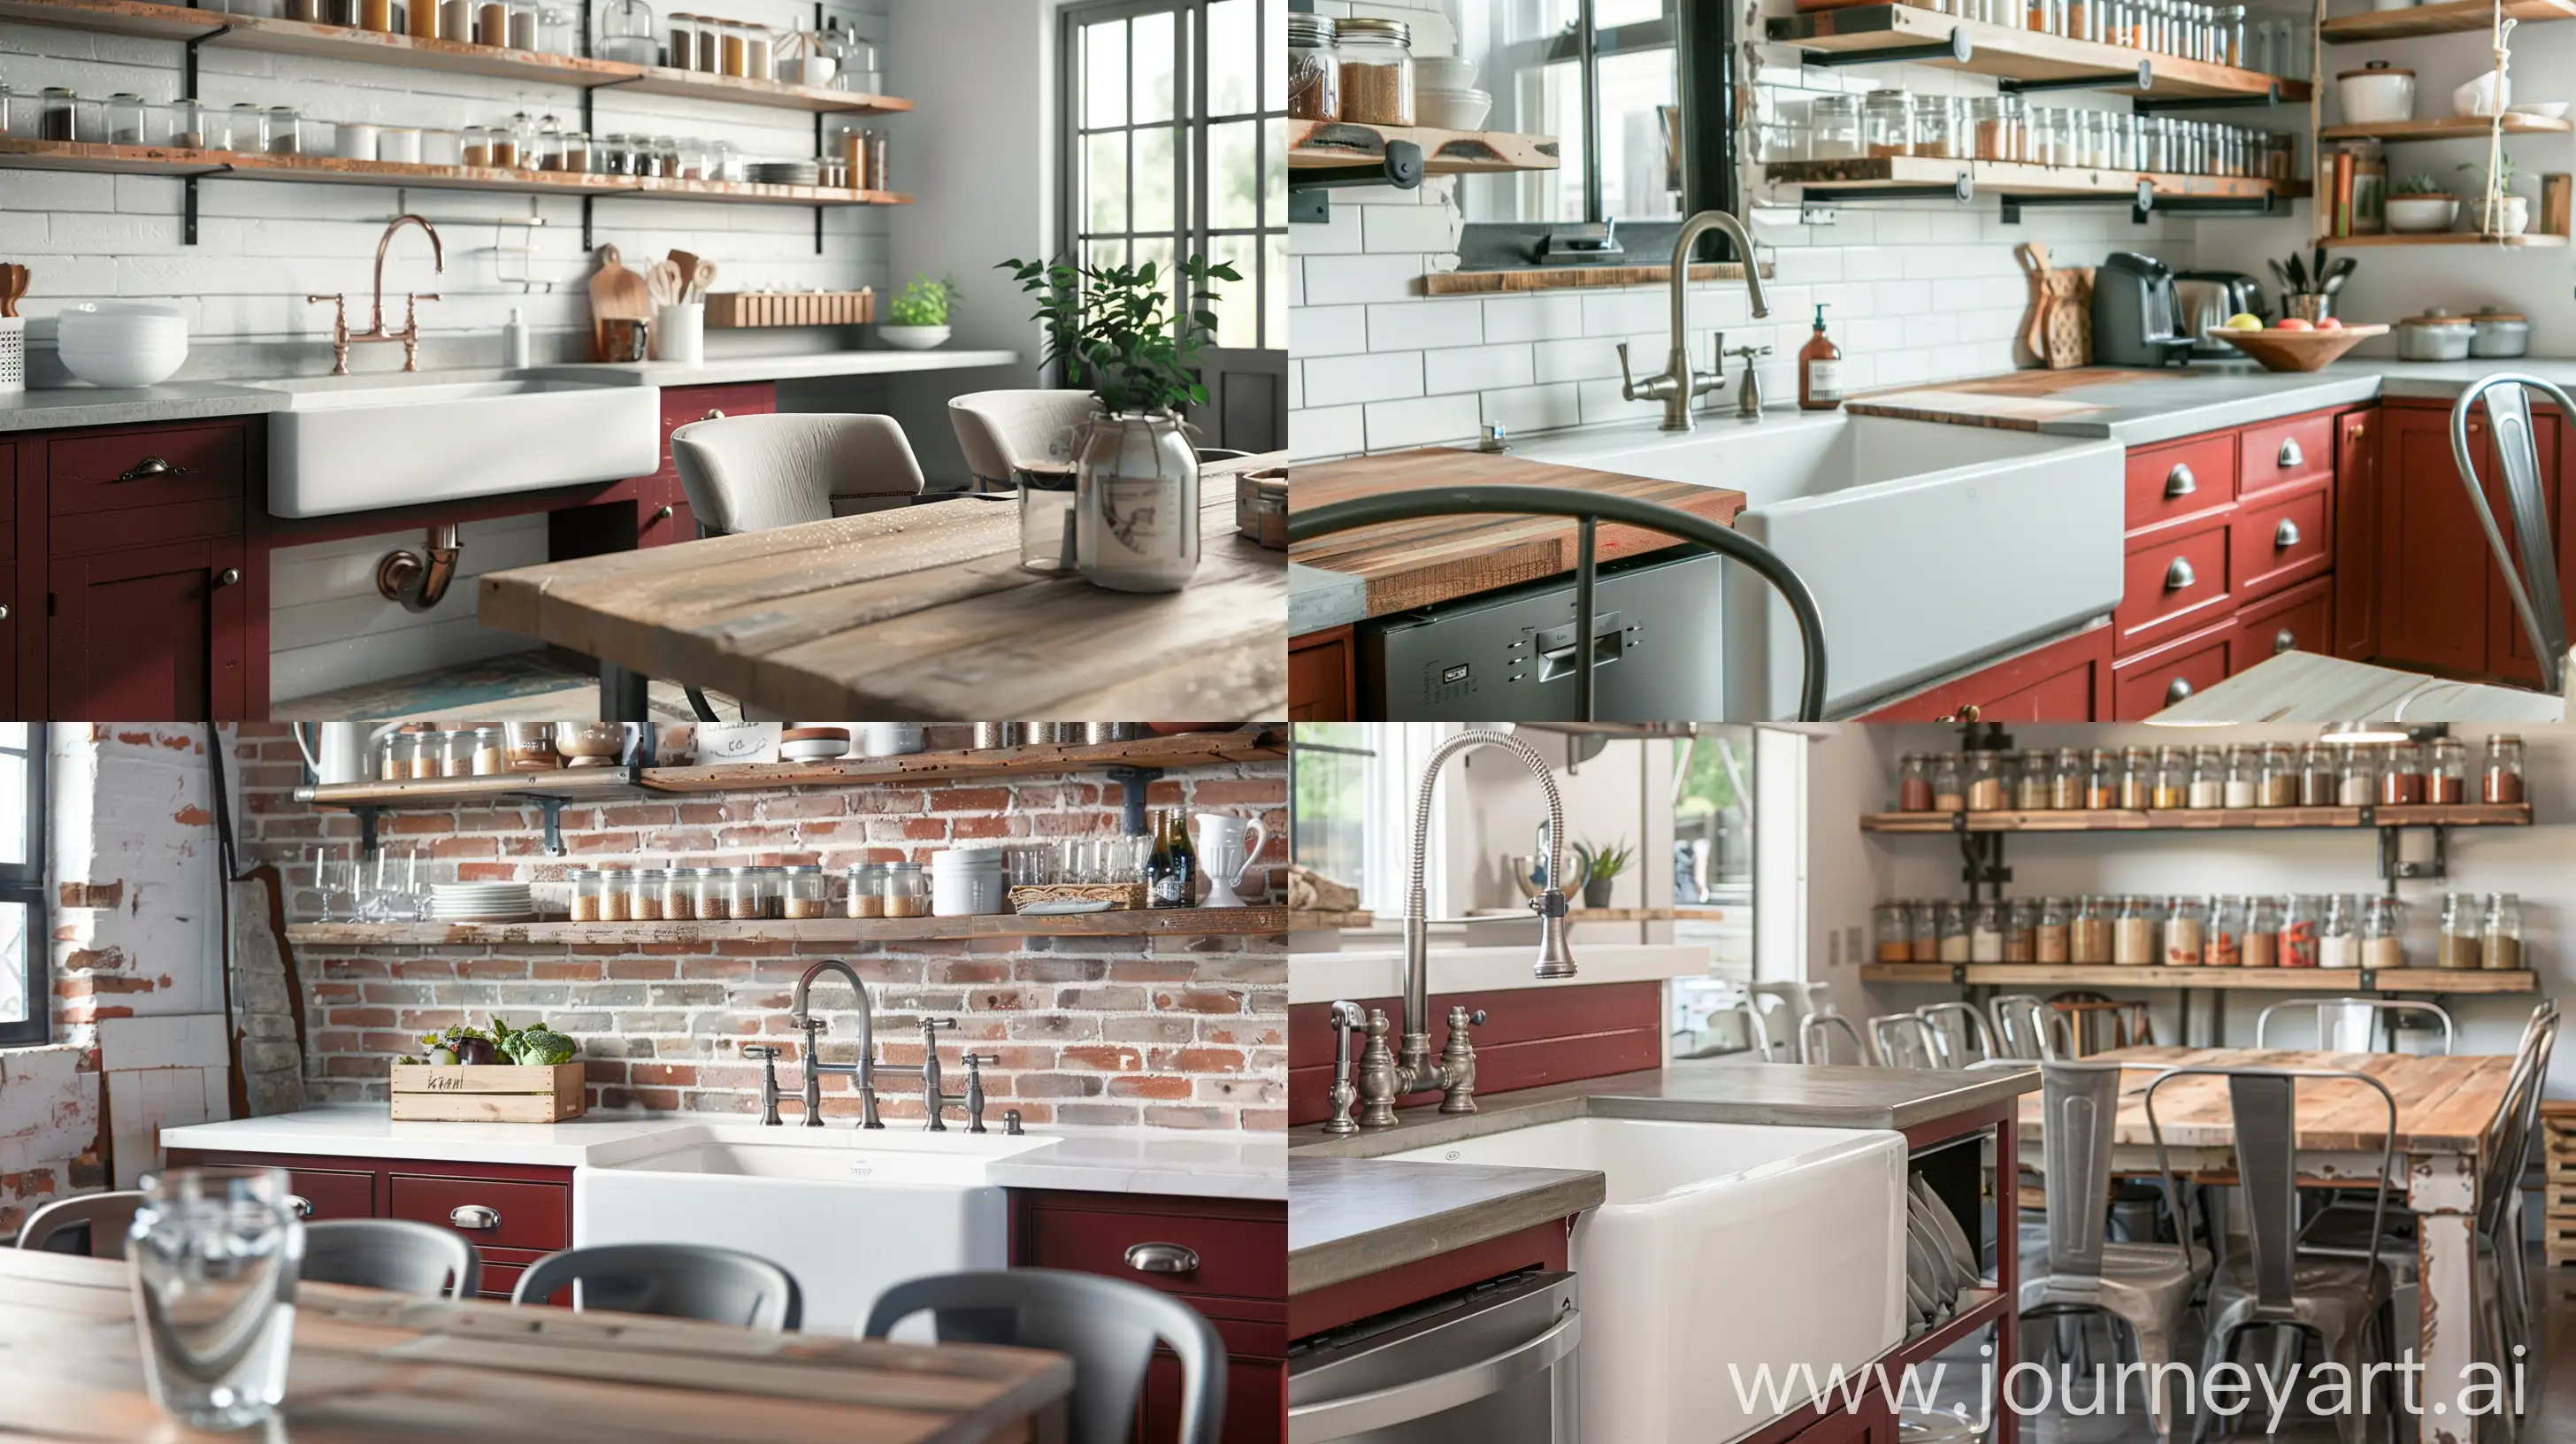 Modern Farmhouse Kitchen Room. Imagine a farmhouse sink, open shelving showcasing mason jars, and a large reclaimed wood dining table with industrial-style chairs, Warm rustic red, farmhouse white, and brushed stainless steel. These colors create a harmonious blend of old and new. --ar 16:9